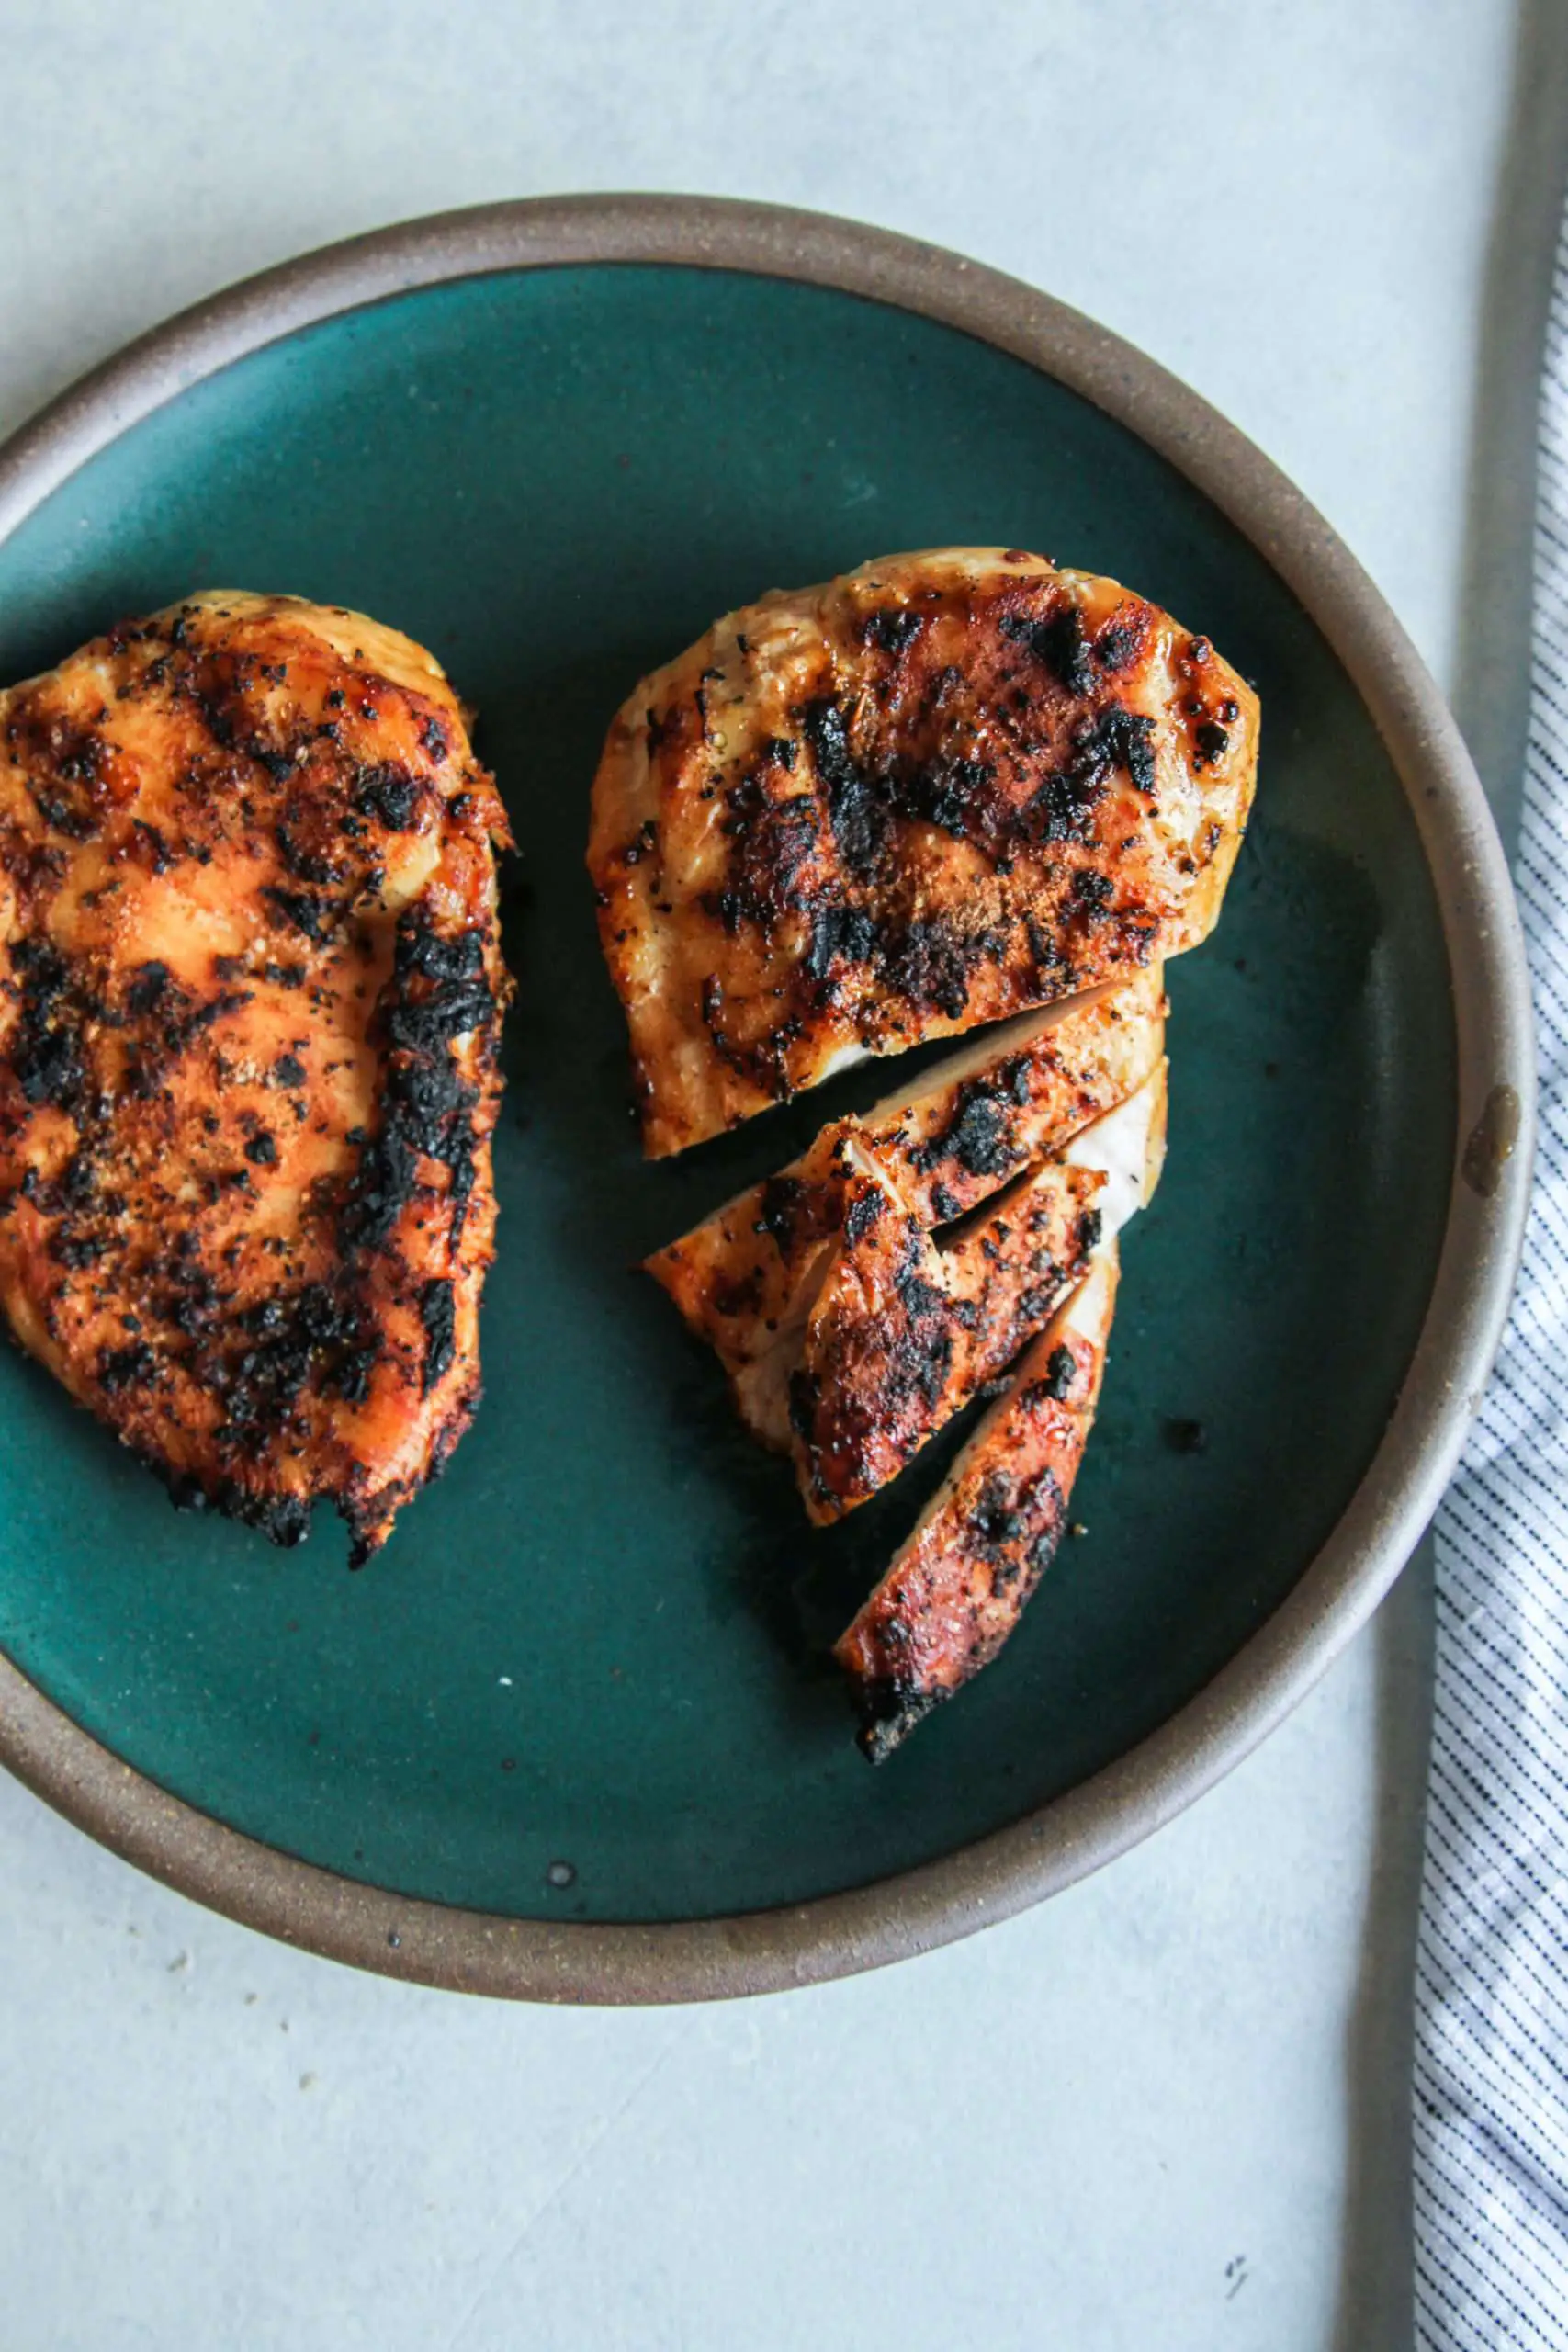 Grilled chicken with seasoning